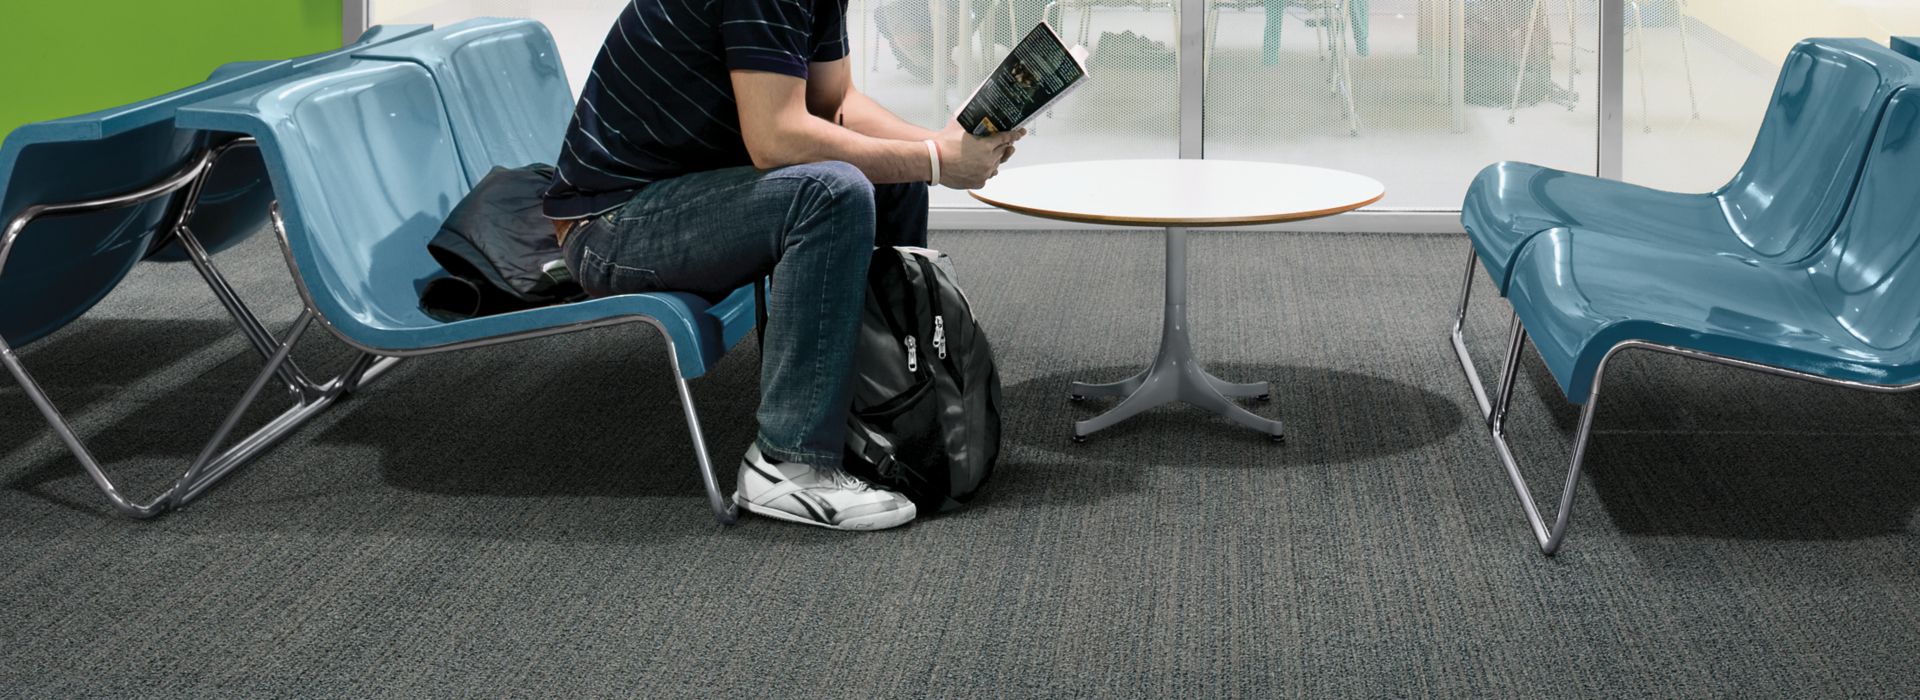 Interface BP410 plank carpet tile with student seated on bench in front of meeting area